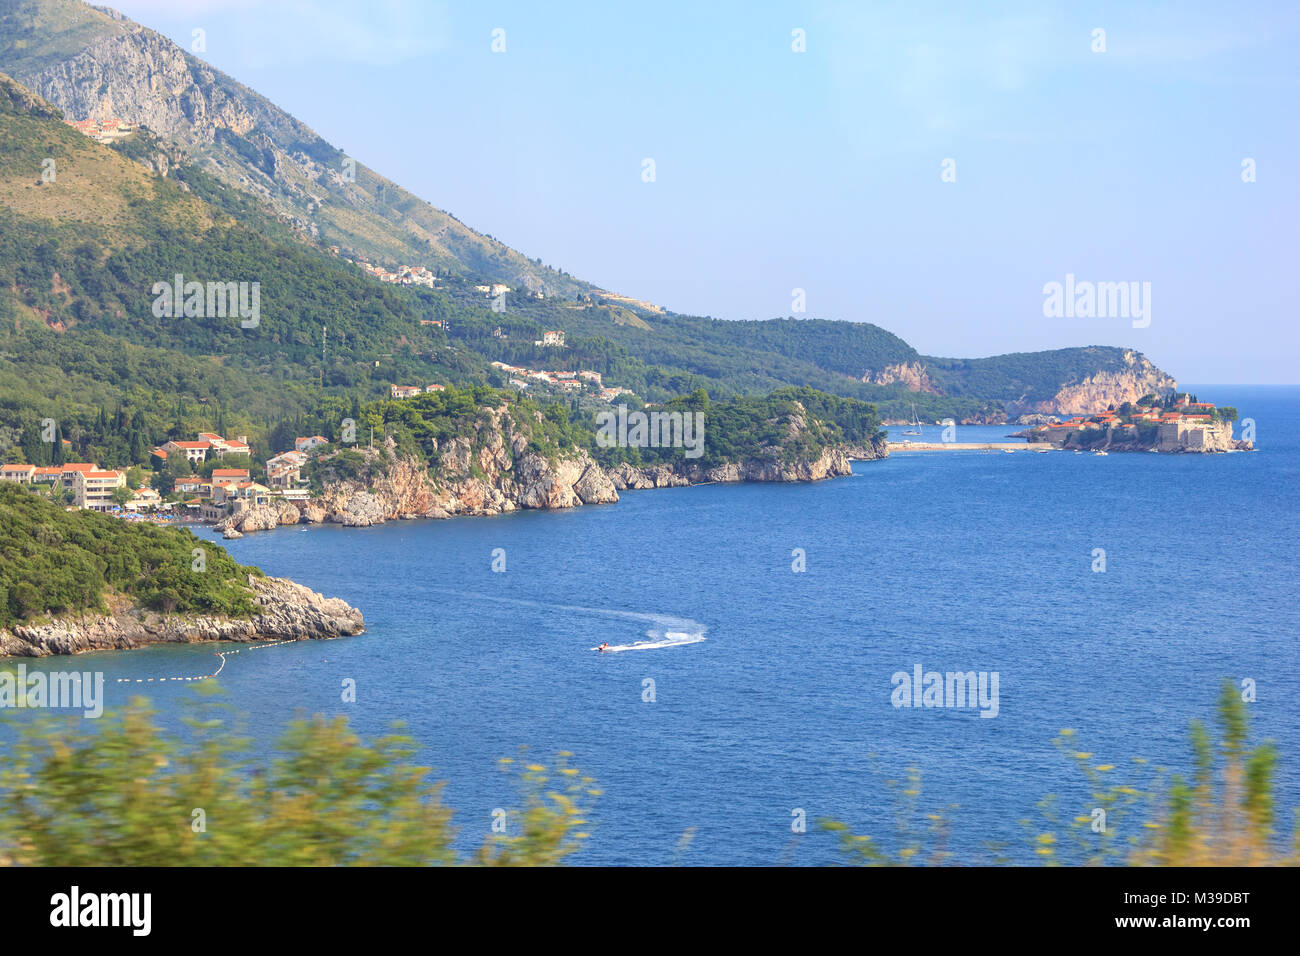 View of the sea bays, the Przno city and the island of Sveti Stefan in Montenegro from the bus passing along the seacoast Stock Photo